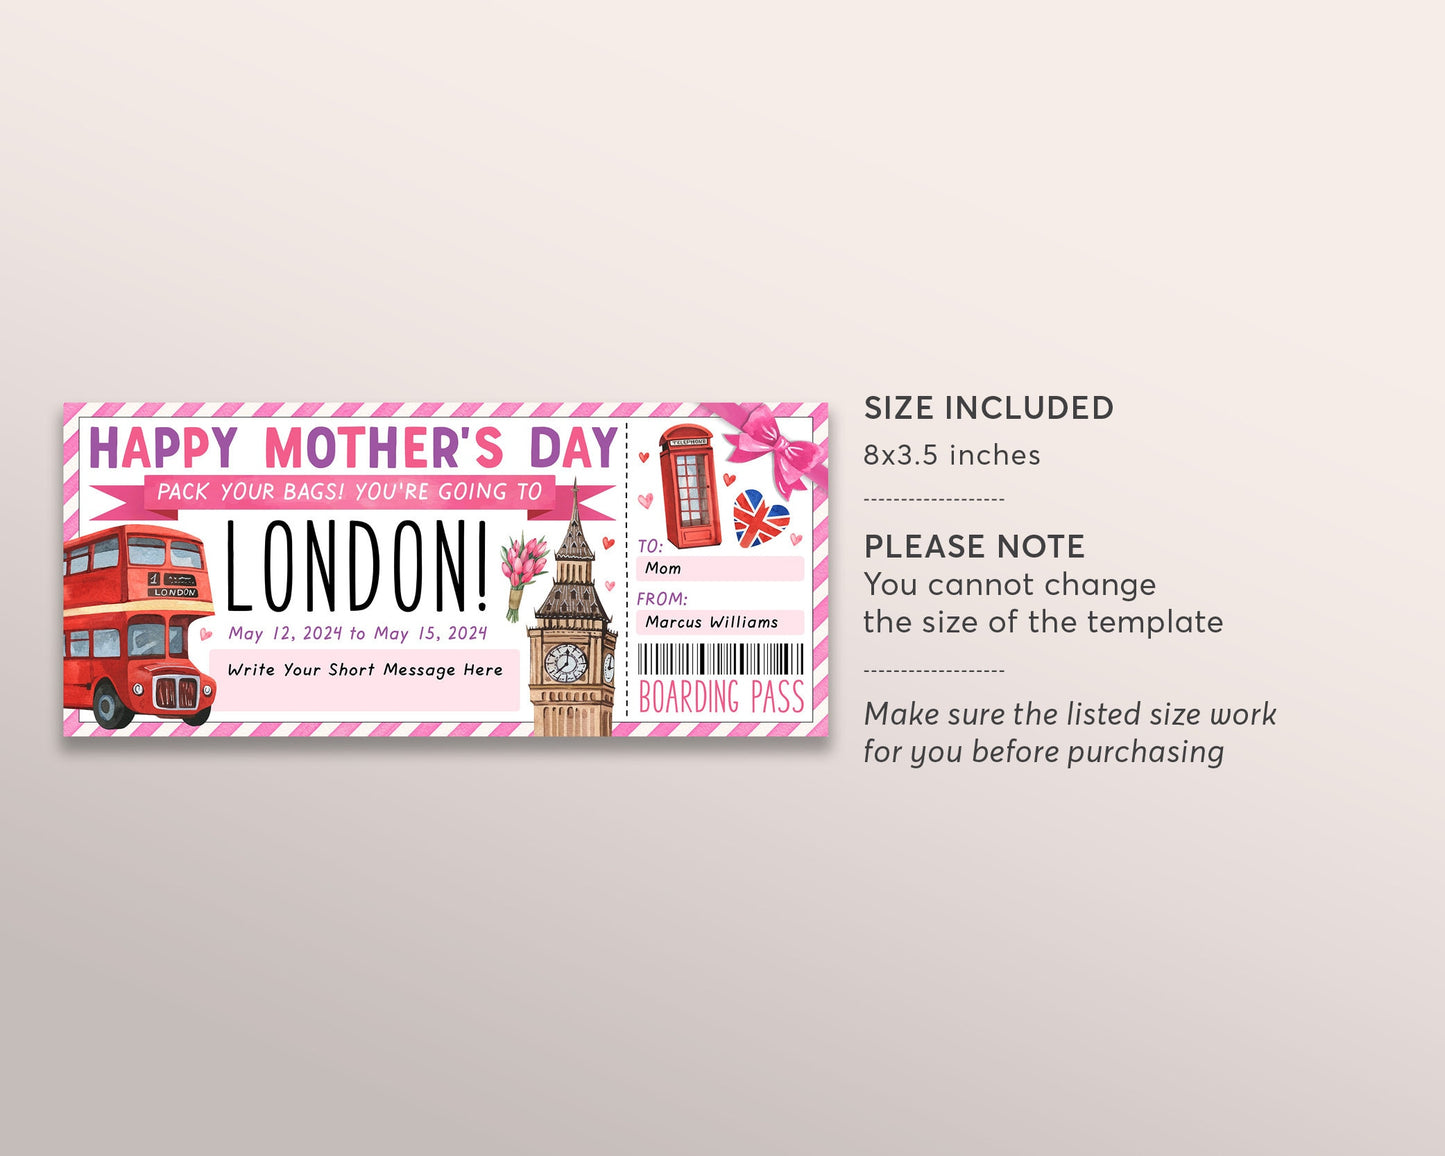 Mothers Day London Gift Ticket Boarding Pass Editable Template, Surprise Travel Vacation Plane Ticket Certificate For Mom England Trip